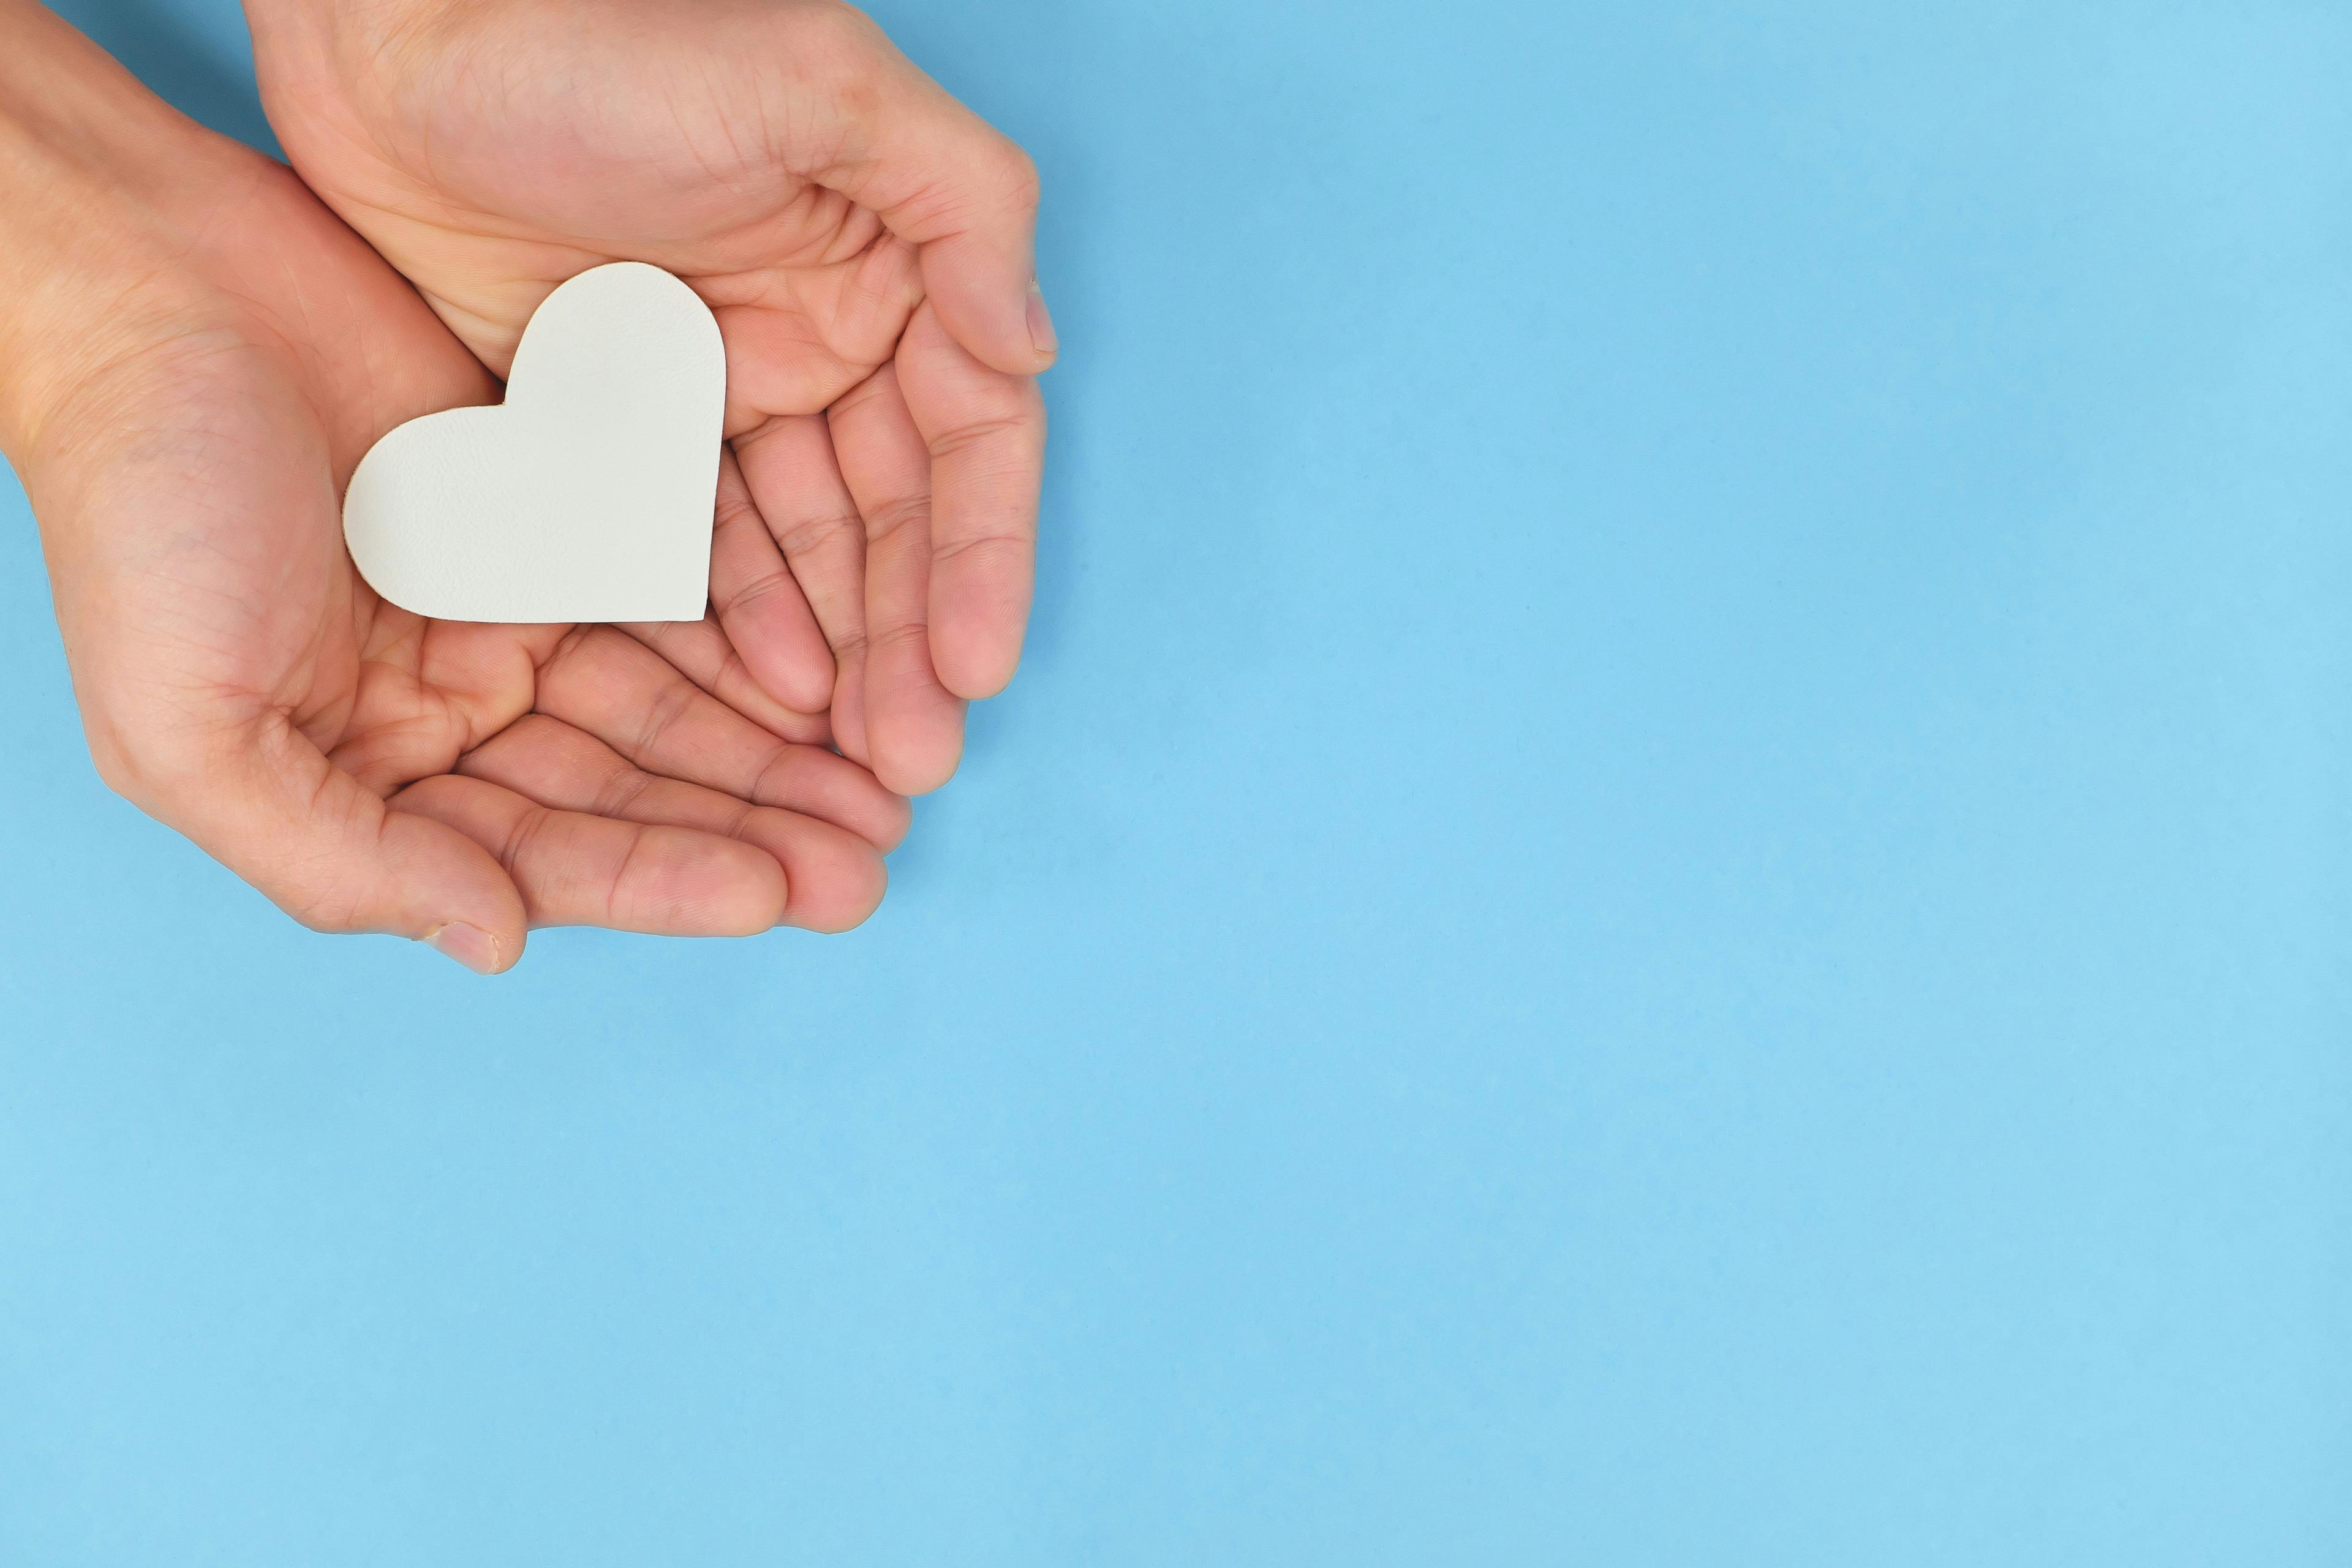 Image of a person holding a paper heart.